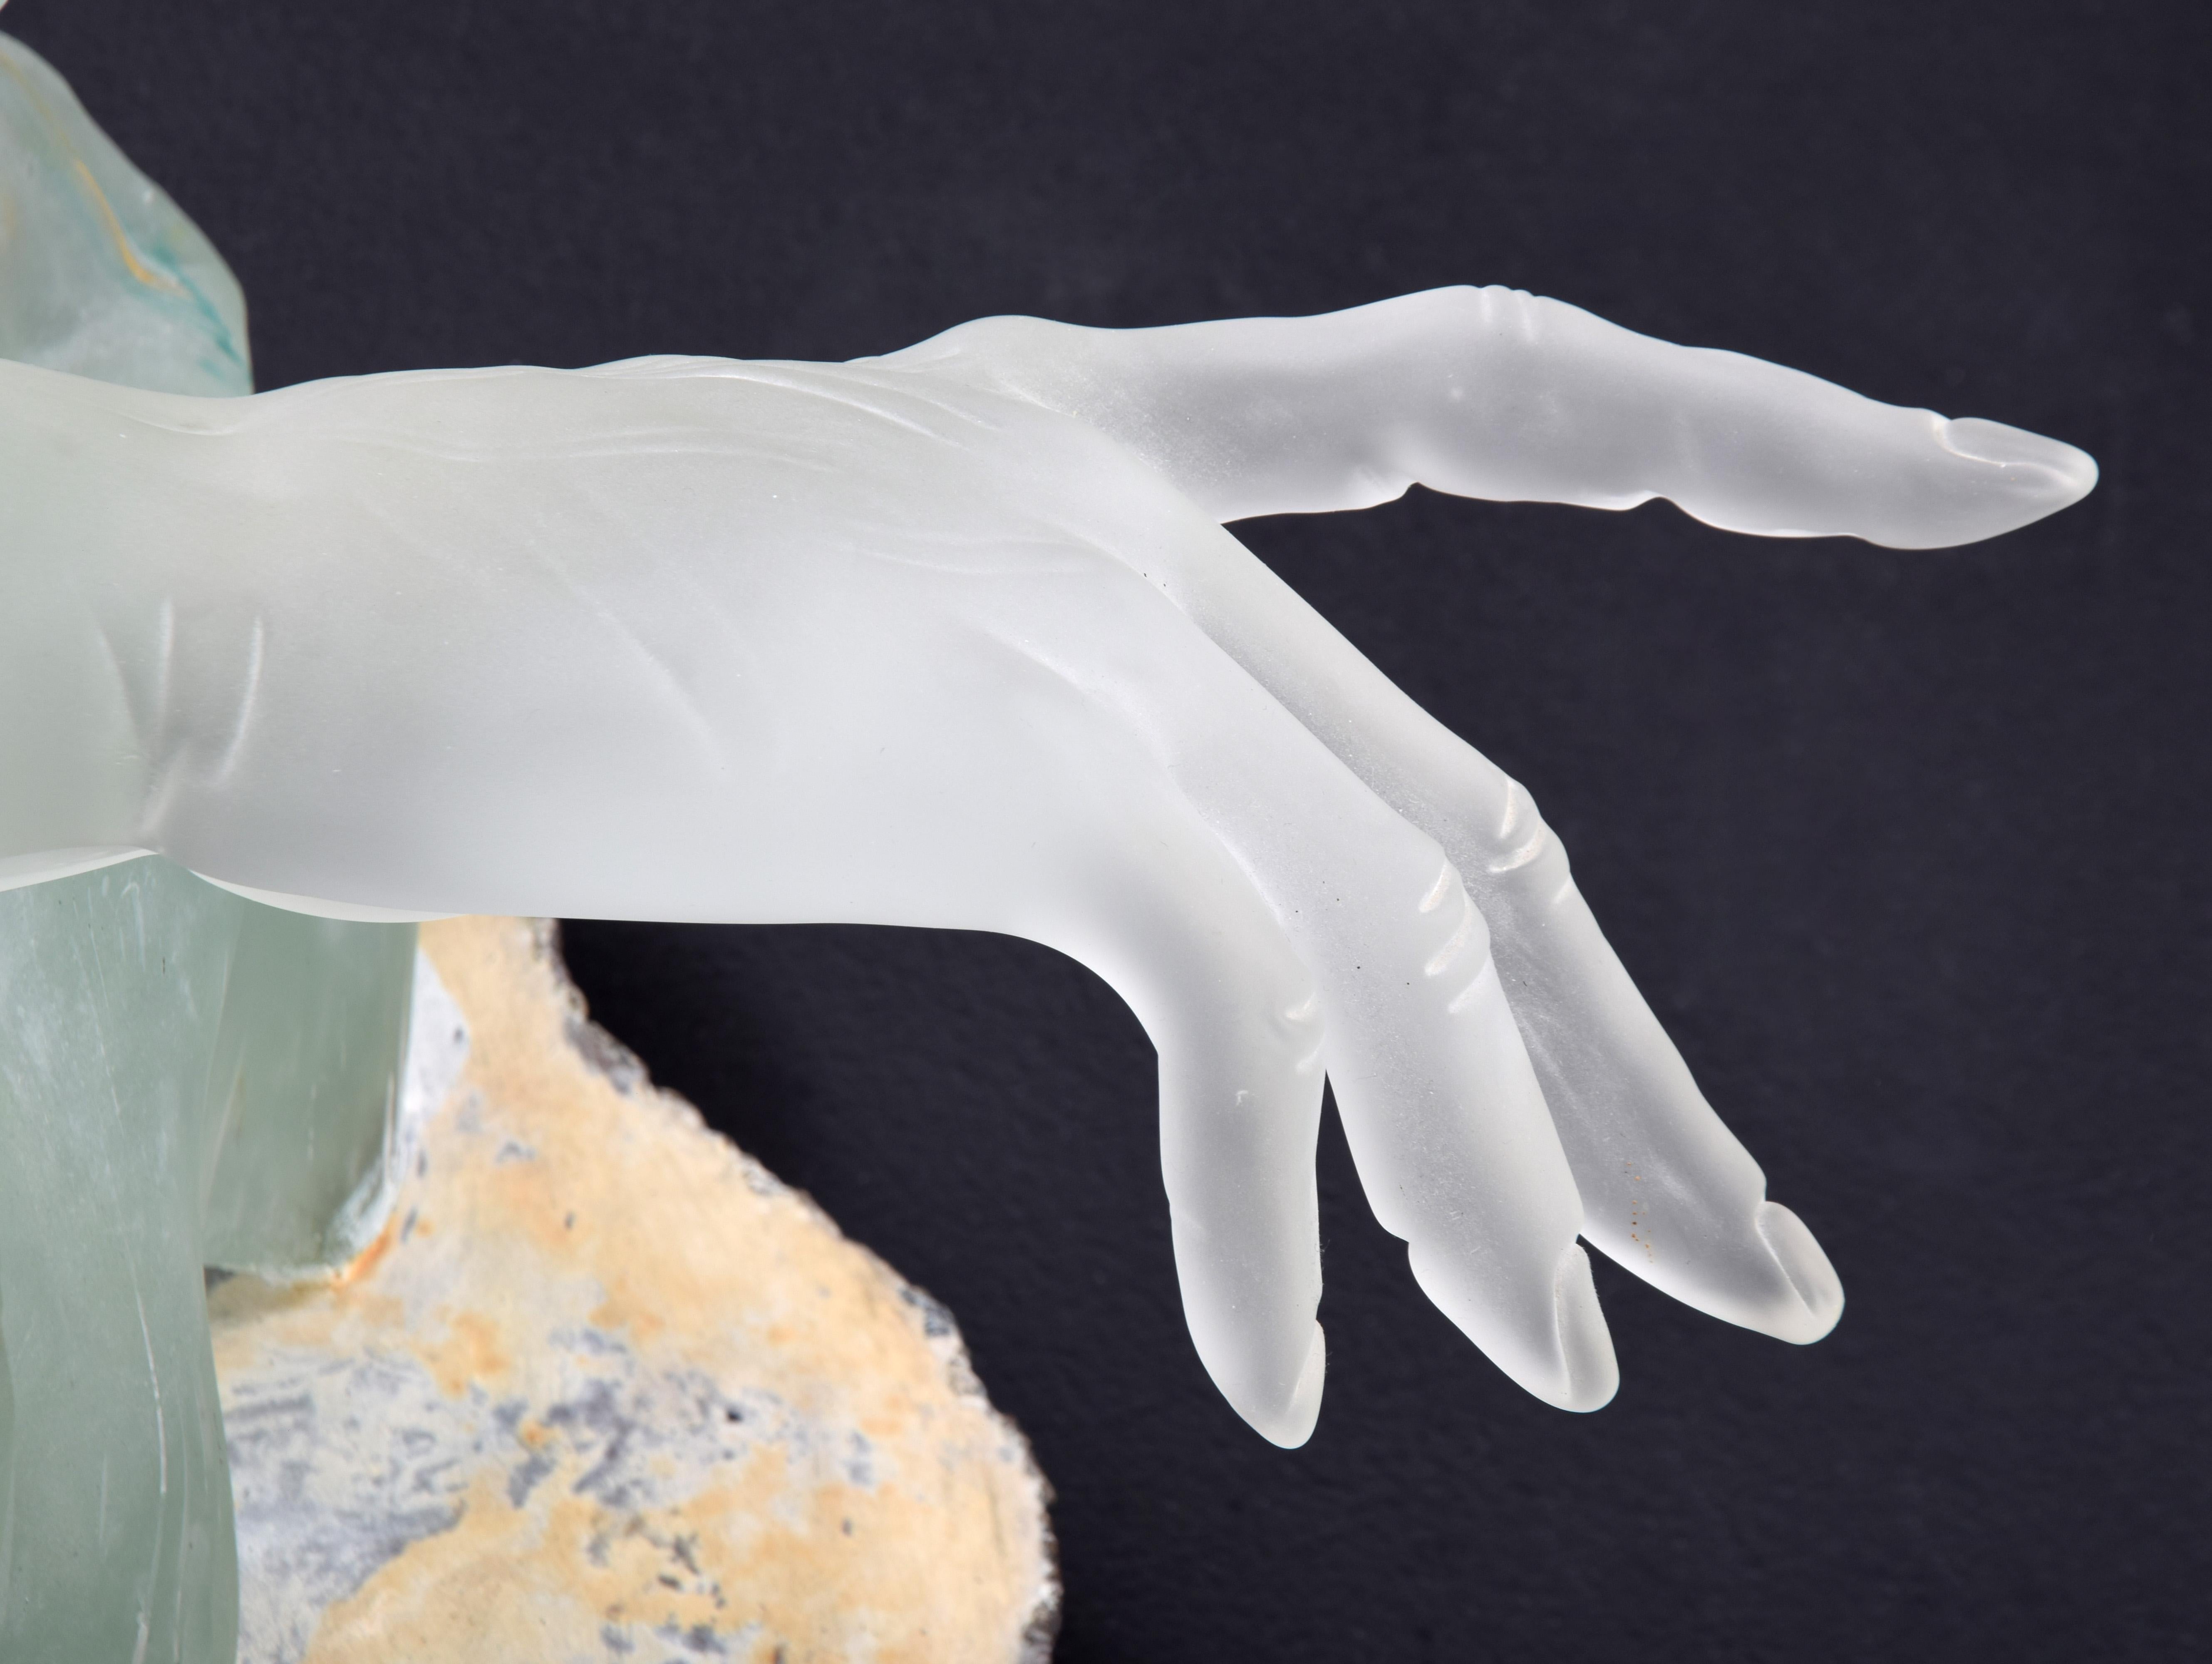 Additional Information: Work is titled “Hand of God.” Item is accompanied by a copy of the purchase receipt issued by William Traver Gallery, Seattle, Washington, dated 10.31.1997. Provenance: William Traver Gallery, Seattle, Washington | Collection